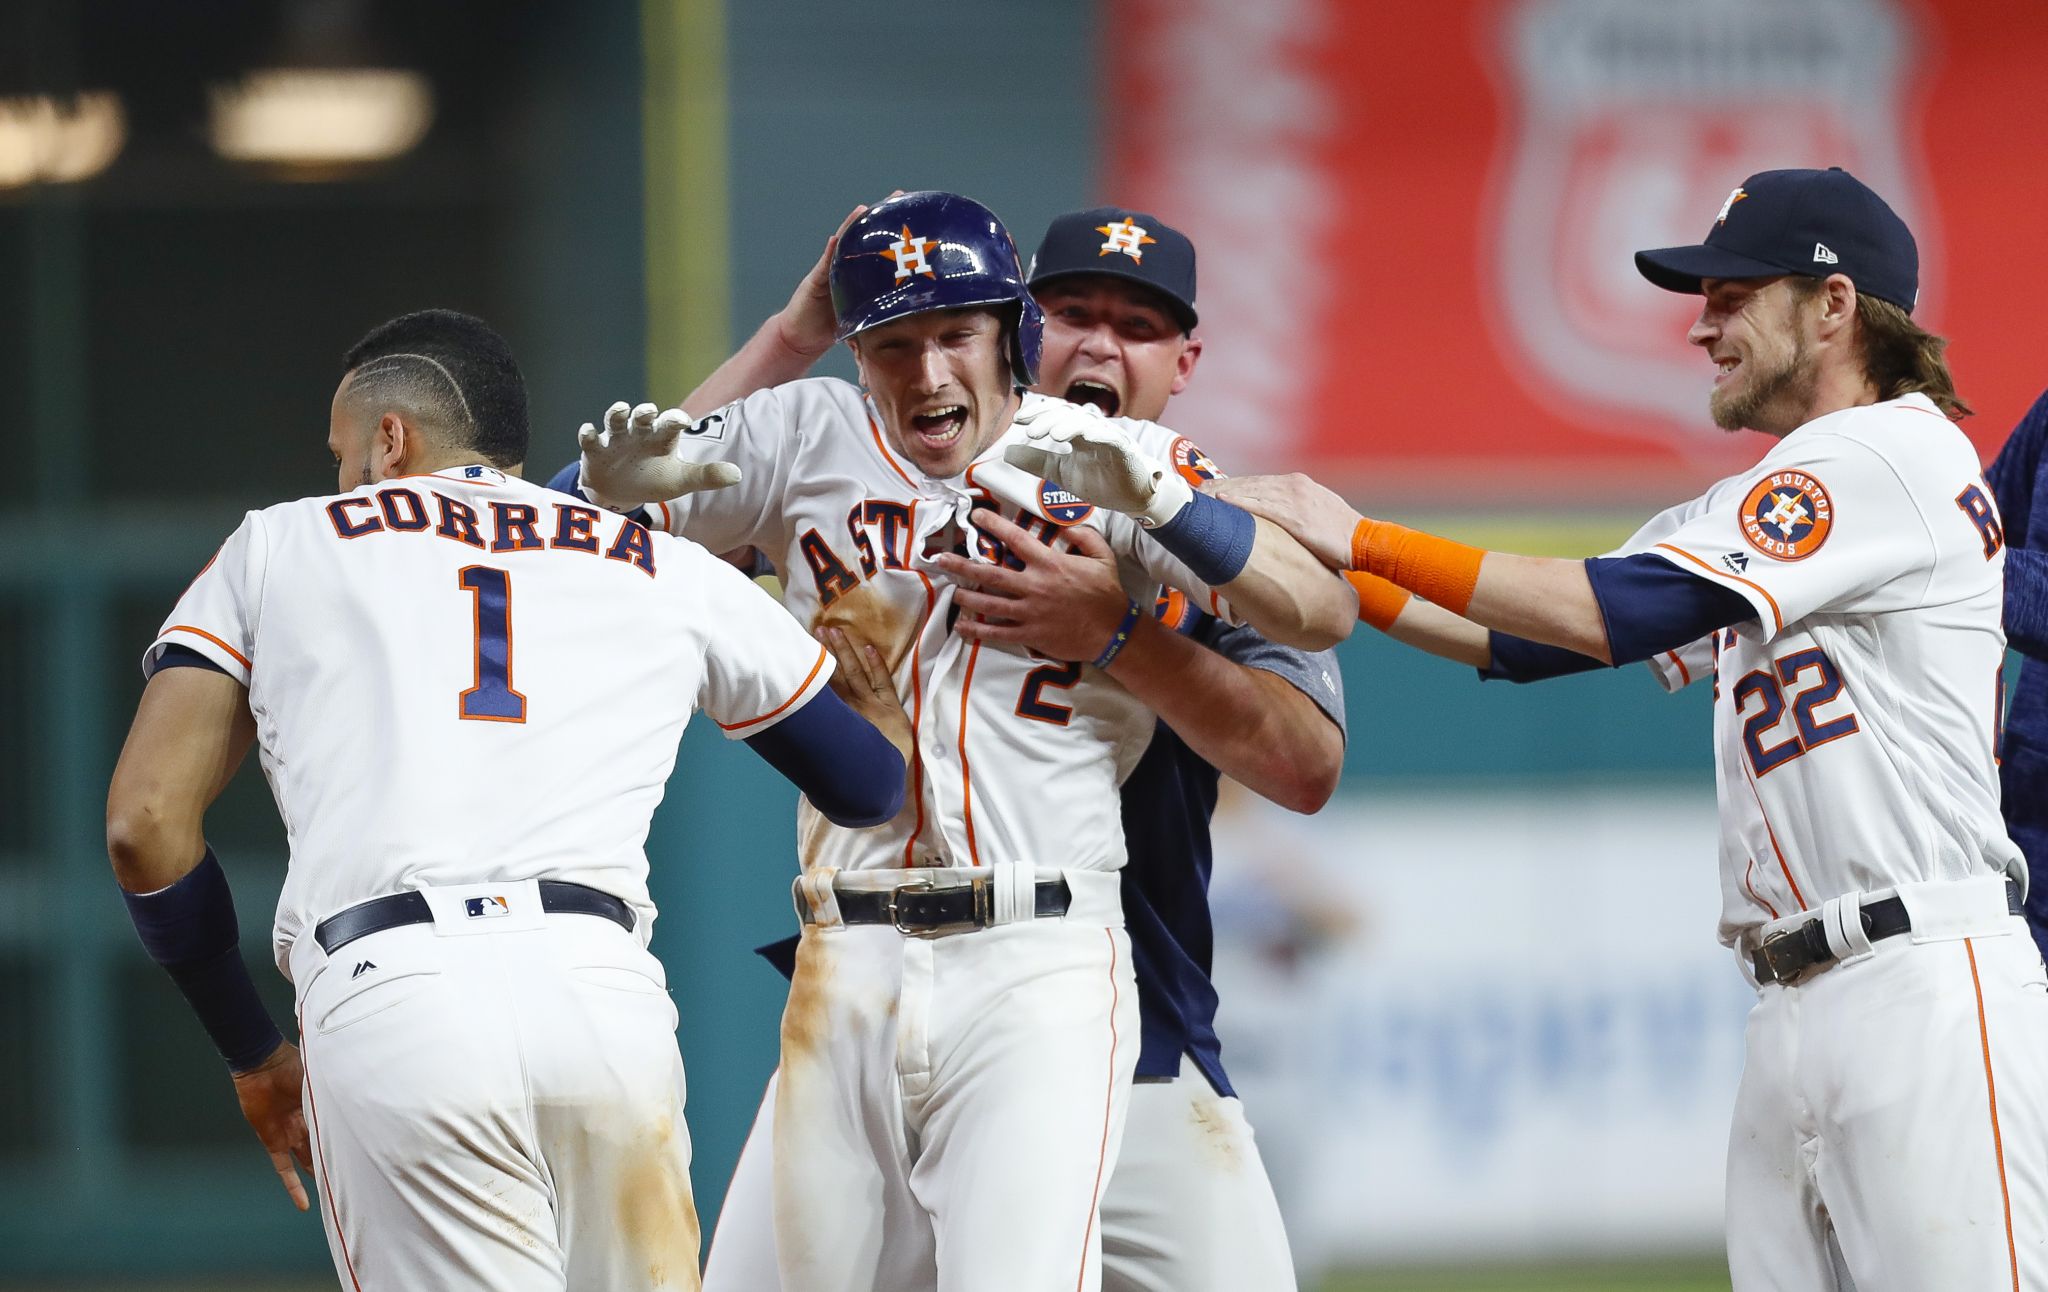 Photos from the Astros' win in Game 5